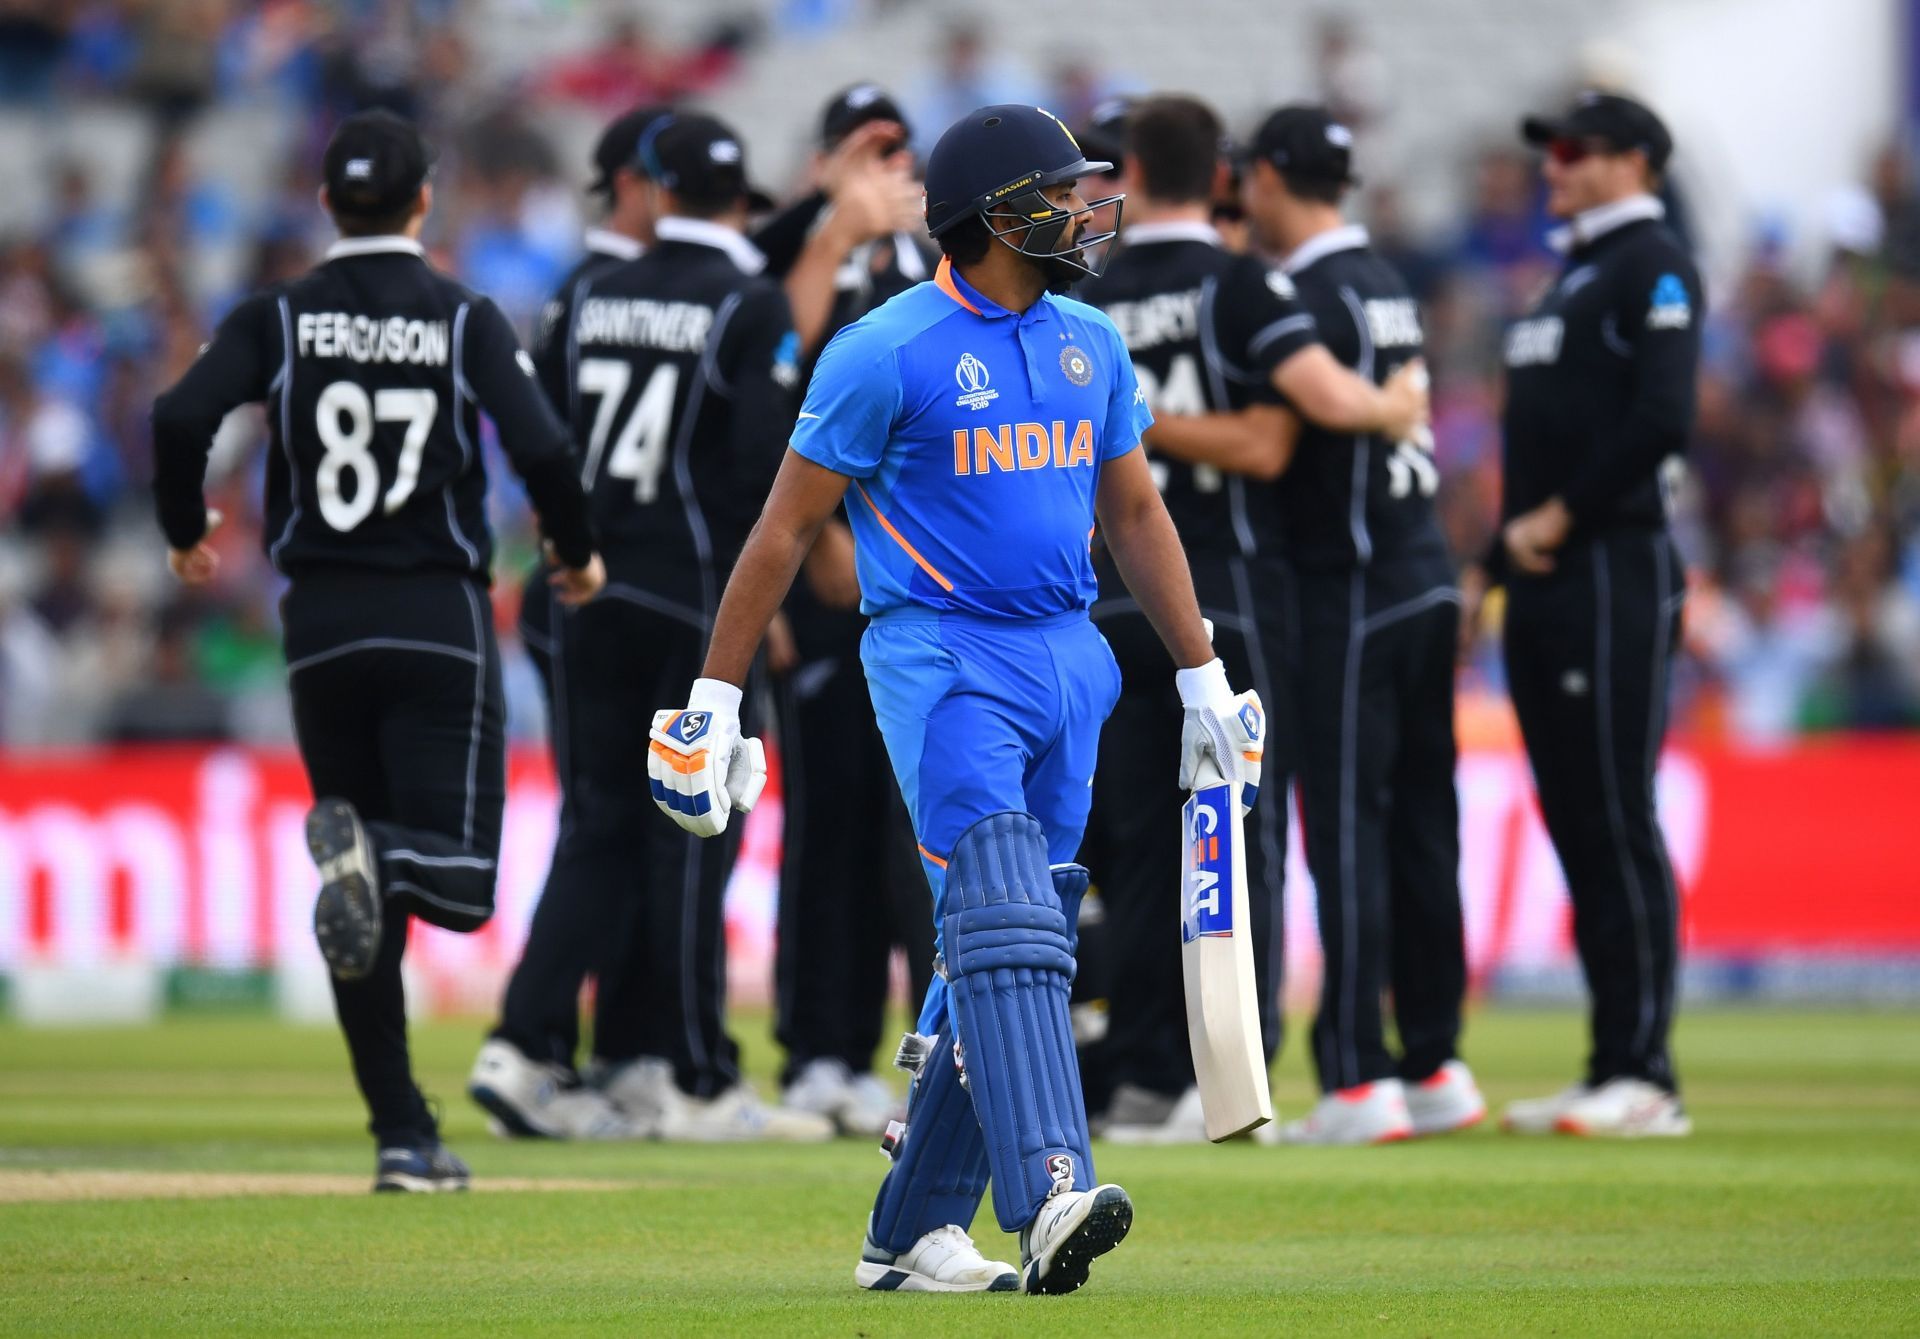 Rohit Sharma scored five centuries in the 2019 World Cup but failed in the semi-final.